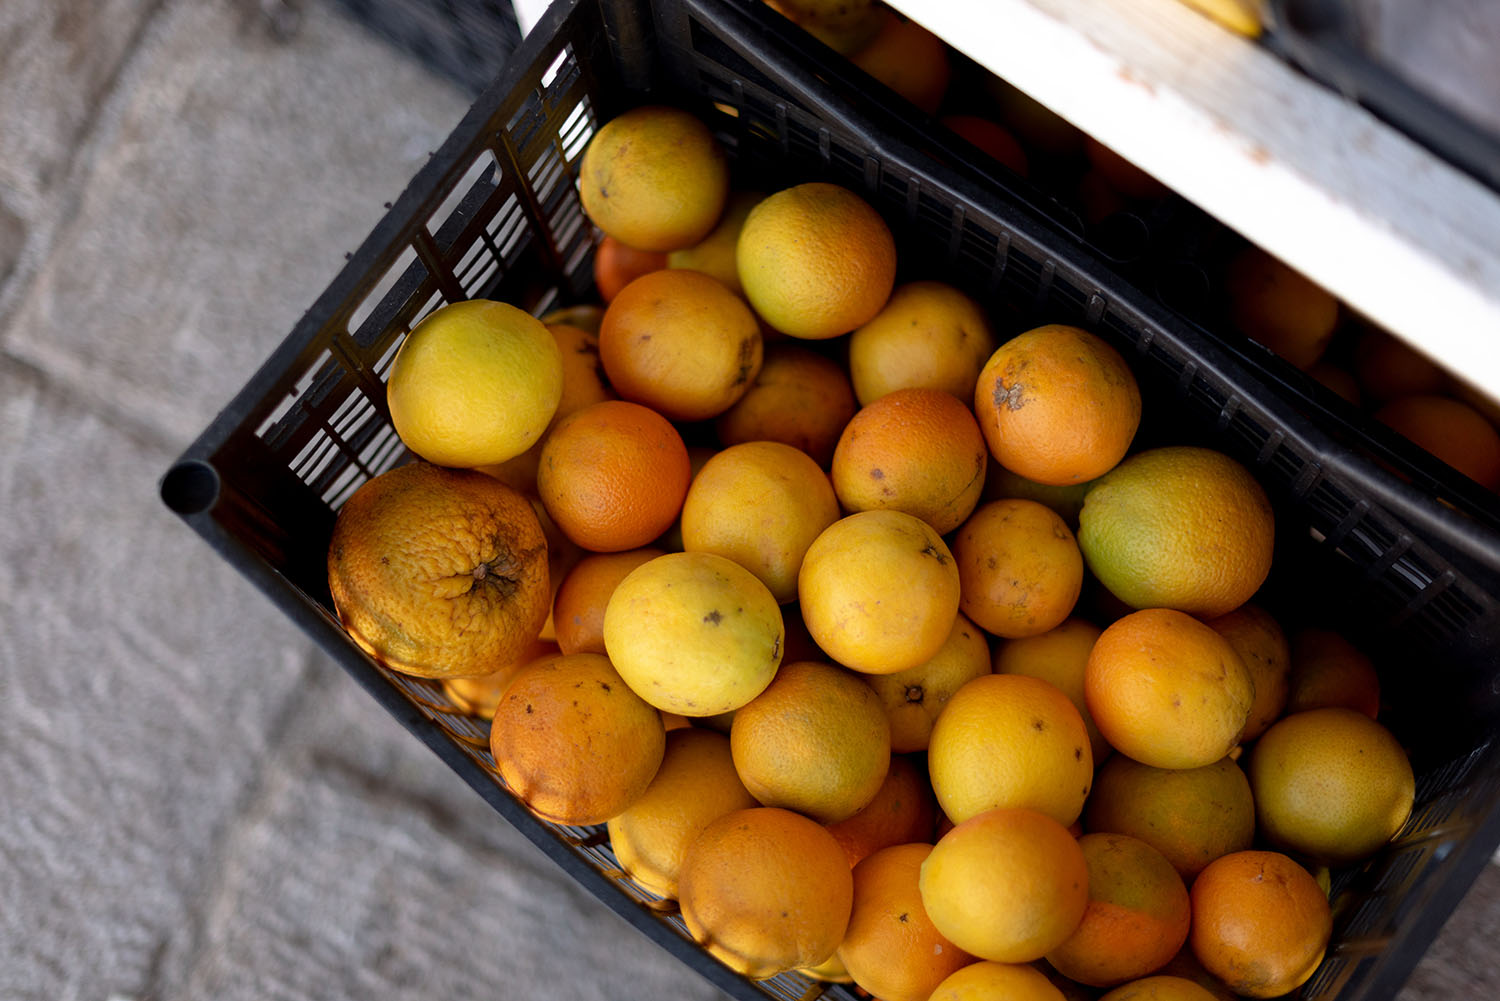 Coco & Vera - A crate of fresh oranges for sale in Hydra Town in the Saronic Islands